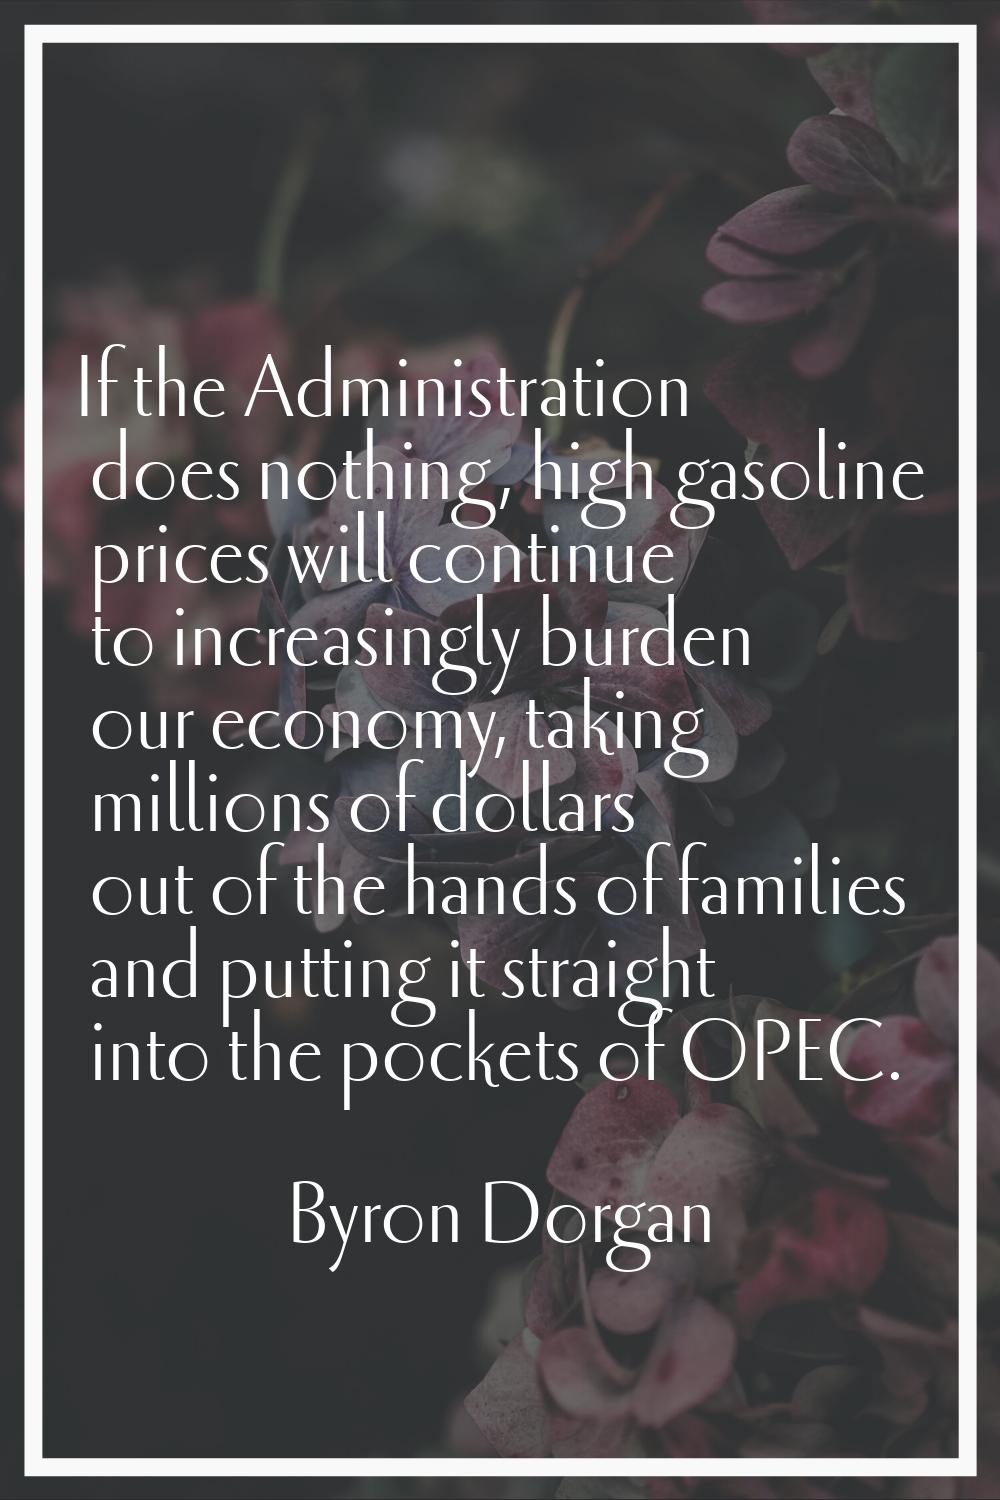 If the Administration does nothing, high gasoline prices will continue to increasingly burden our e